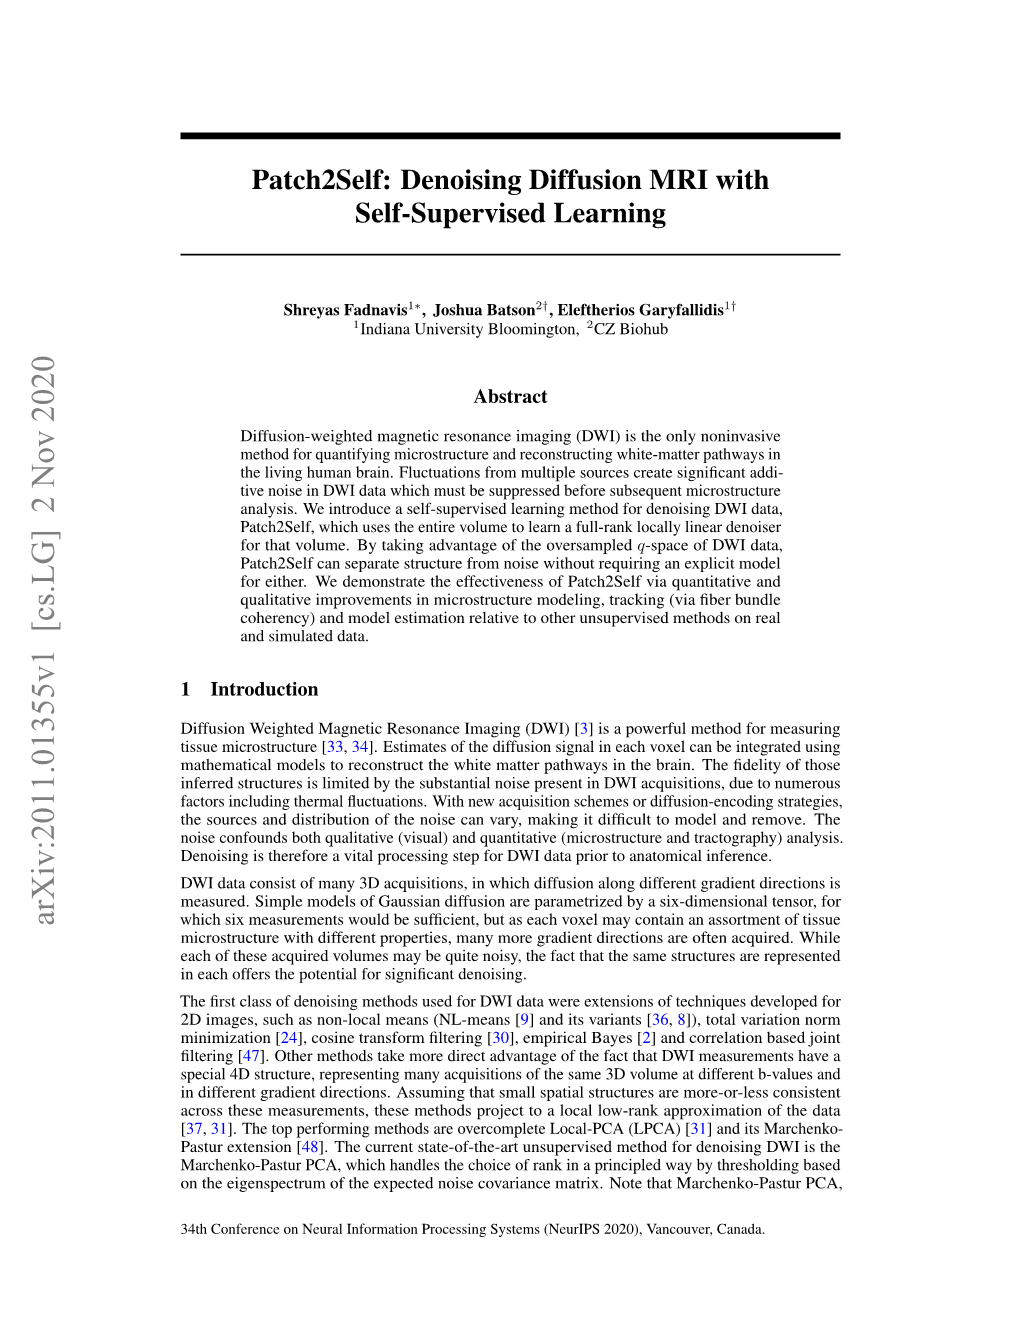 Patch2self: Denoising Diffusion MRI with Self-Supervised Learning